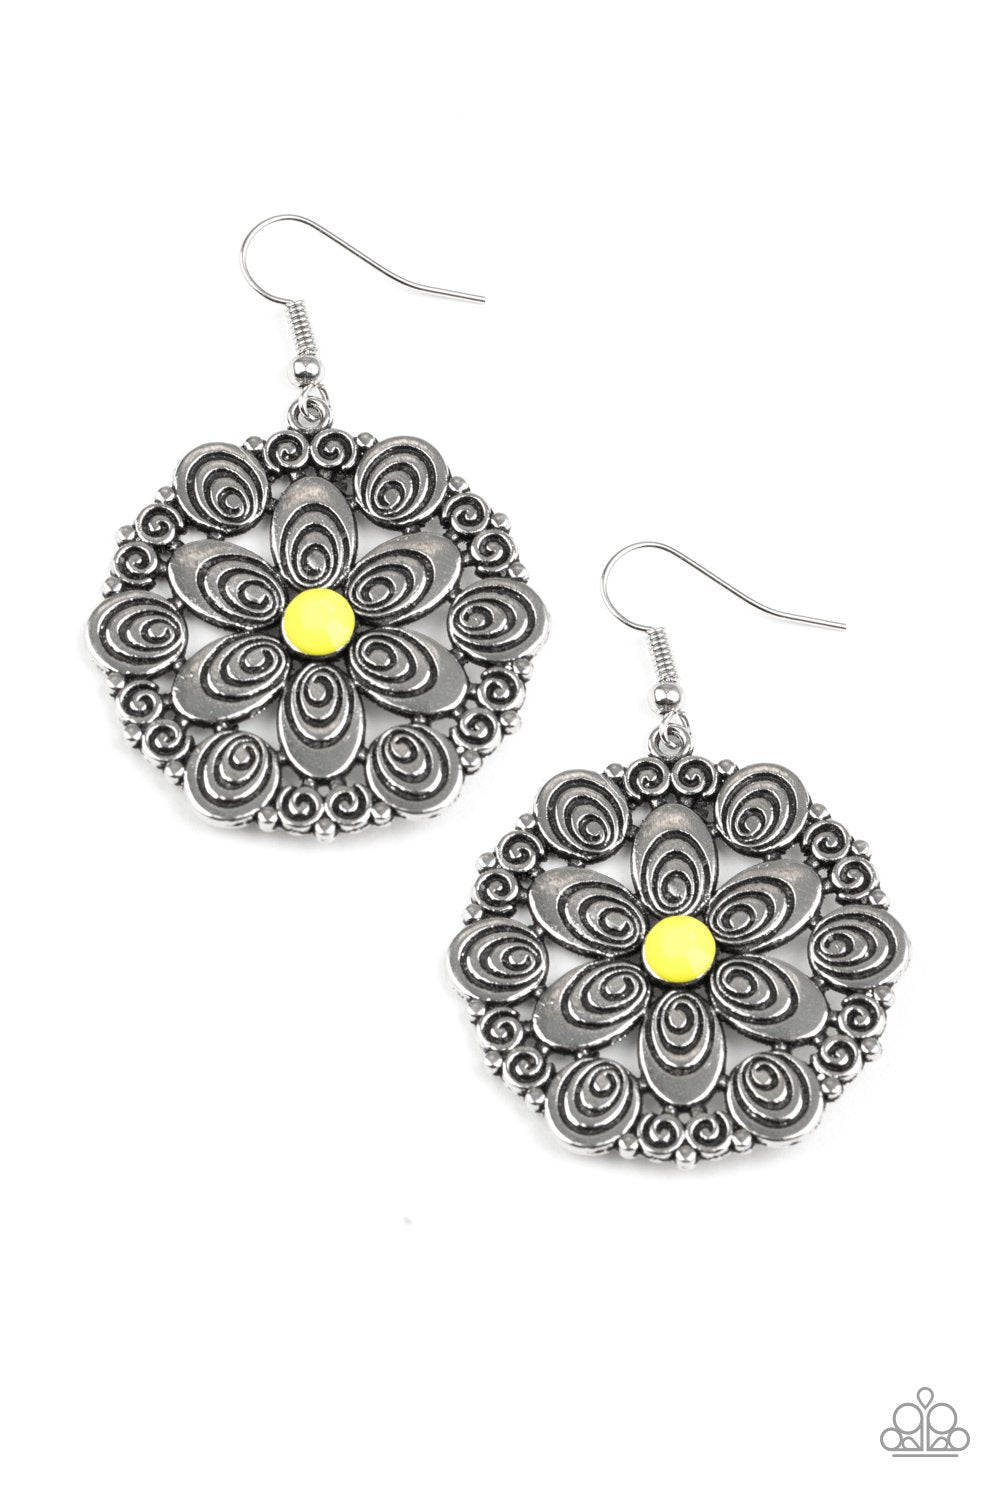 Grove Groove Yellow and Silver Flower Earrings - Paparazzi Accessories-CarasShop.com - $5 Jewelry by Cara Jewels